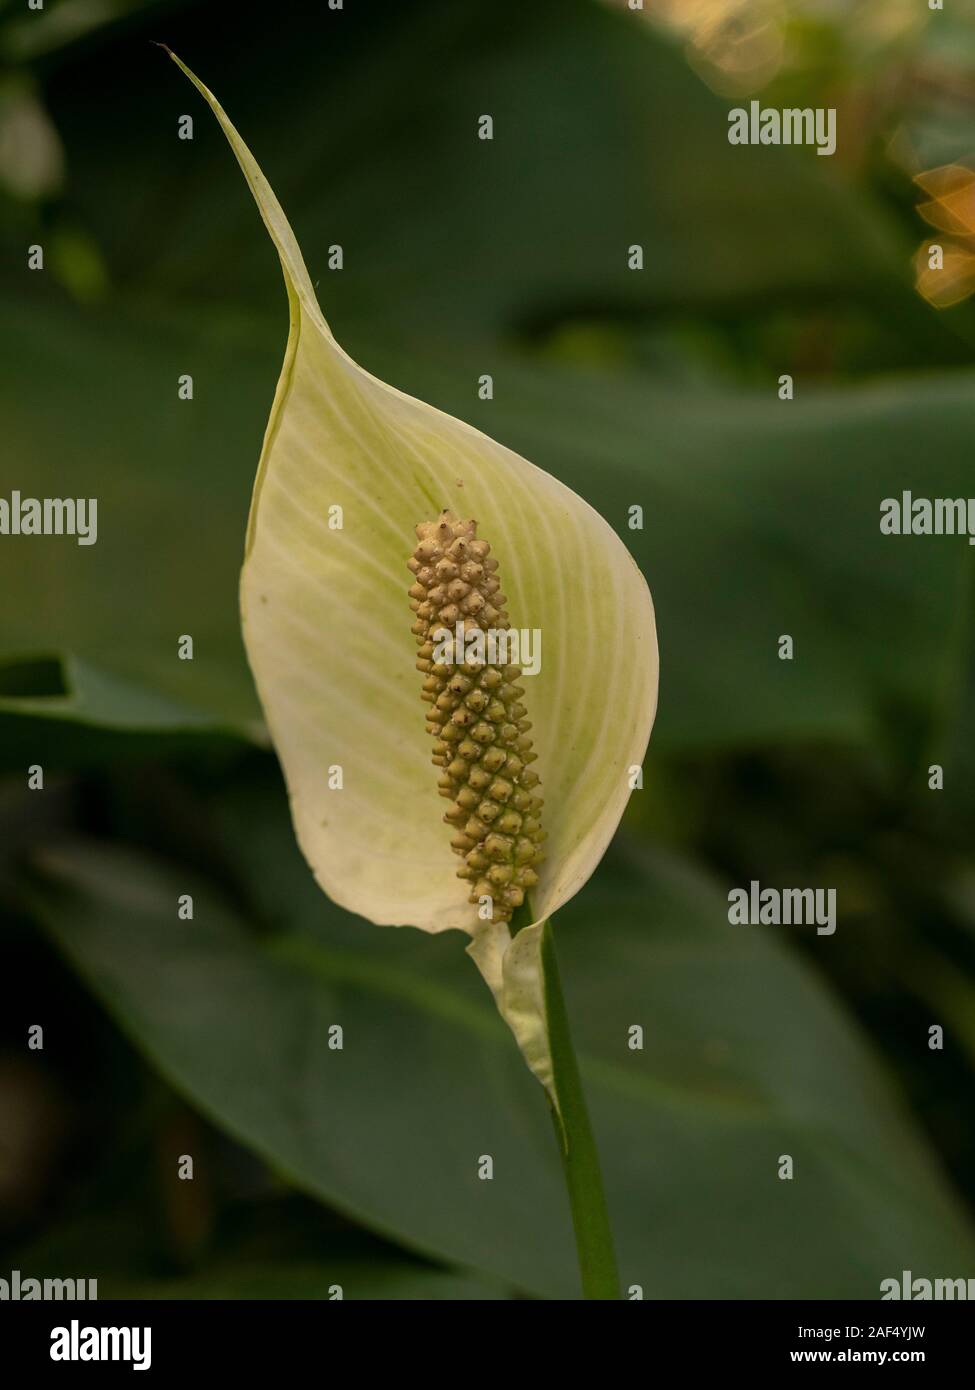 Petal and seeds of a peace lily flower, Spathiphyllum, with green leaves Stock Photo